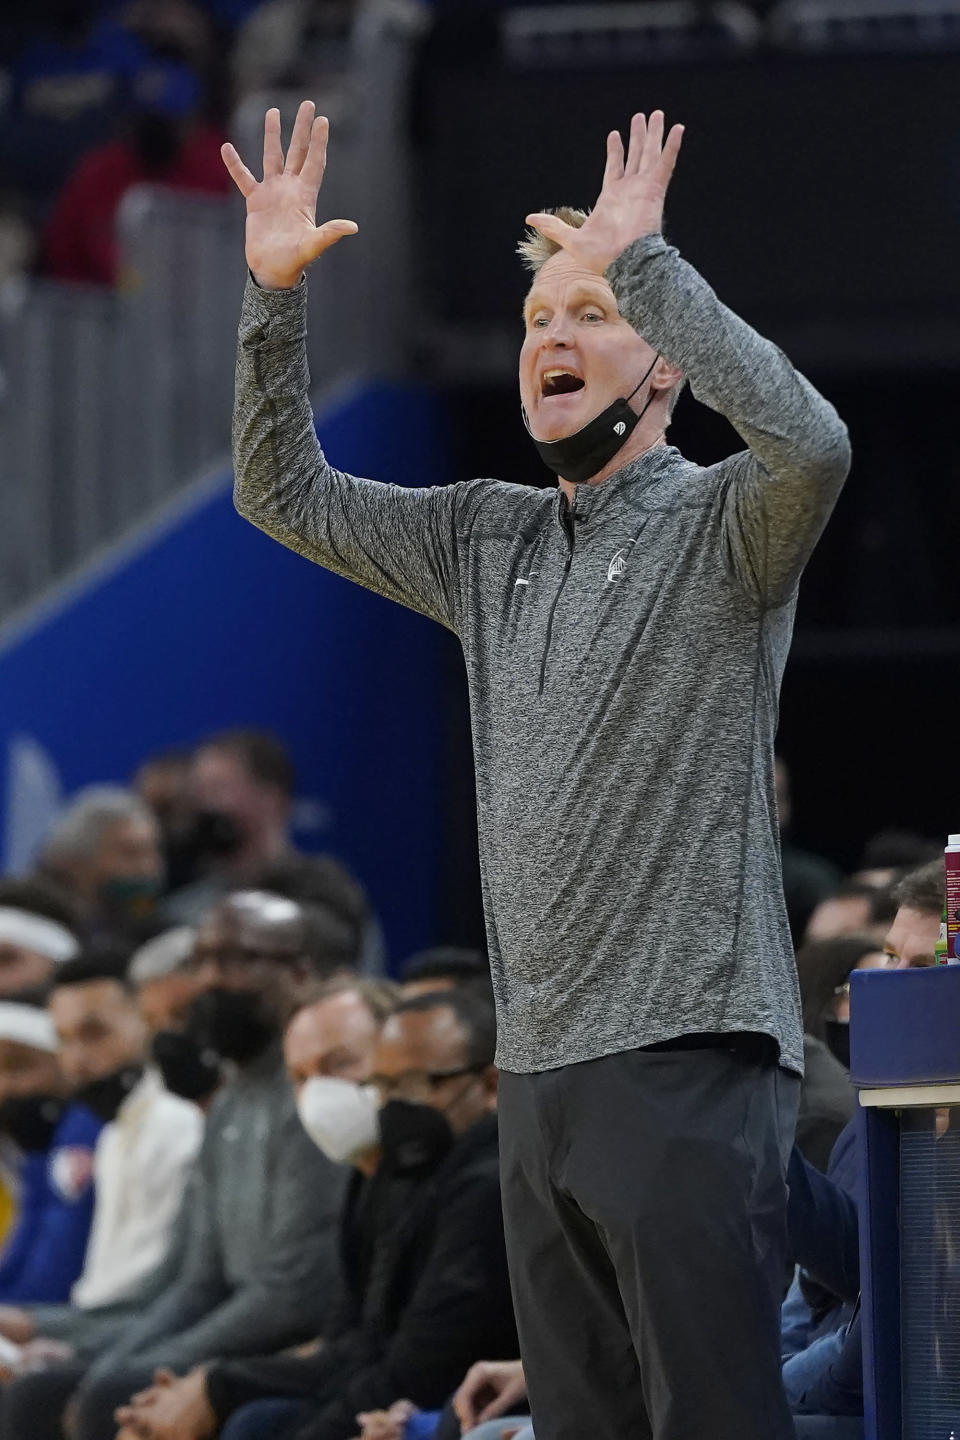 Golden State Warriors head coach Steve Kerr gestures toward players during the first half of his team's NBA basketball game against the Minnesota Timberwolves in San Francisco, Thursday, Jan. 27, 2022. (AP Photo/Jeff Chiu)